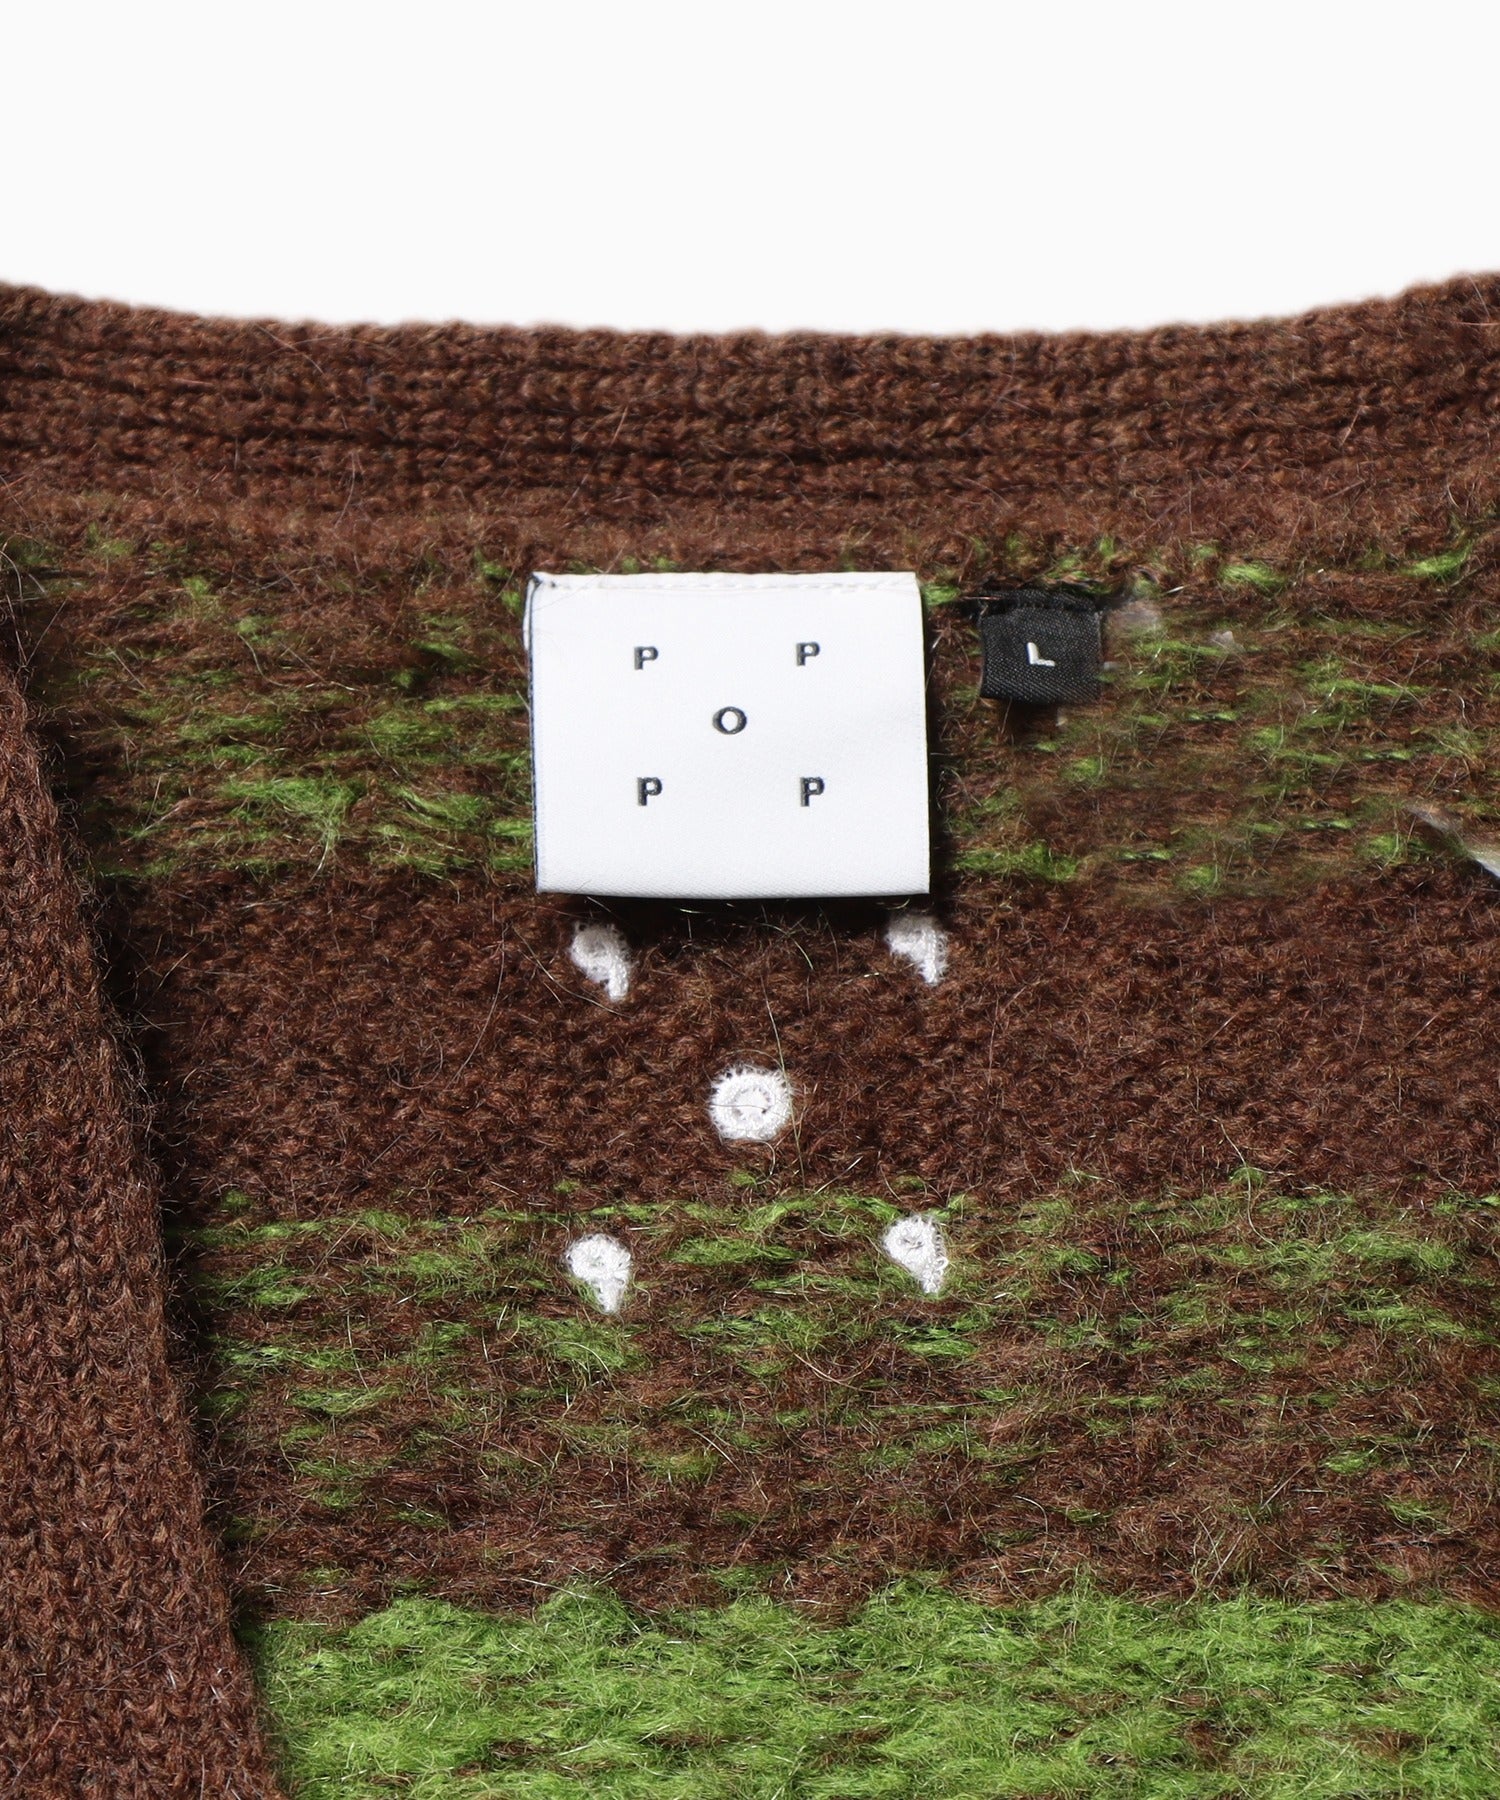 POP triped knitted cardigan